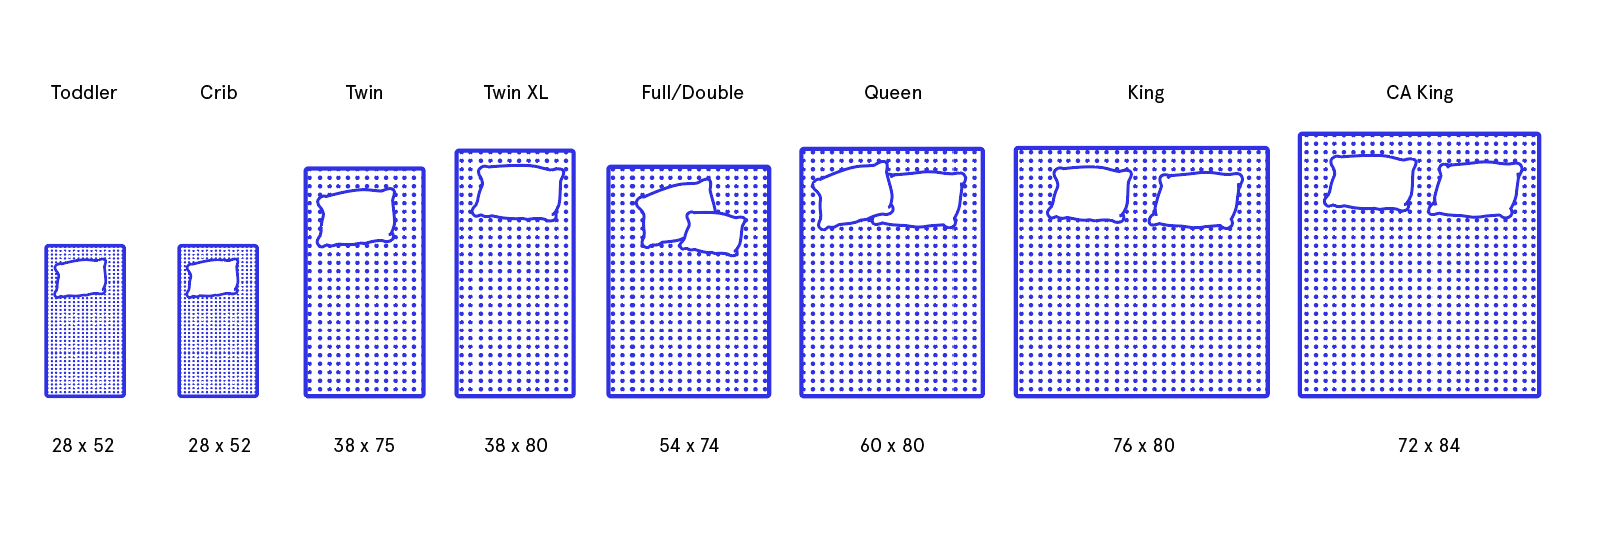 width if queen and king mattresses